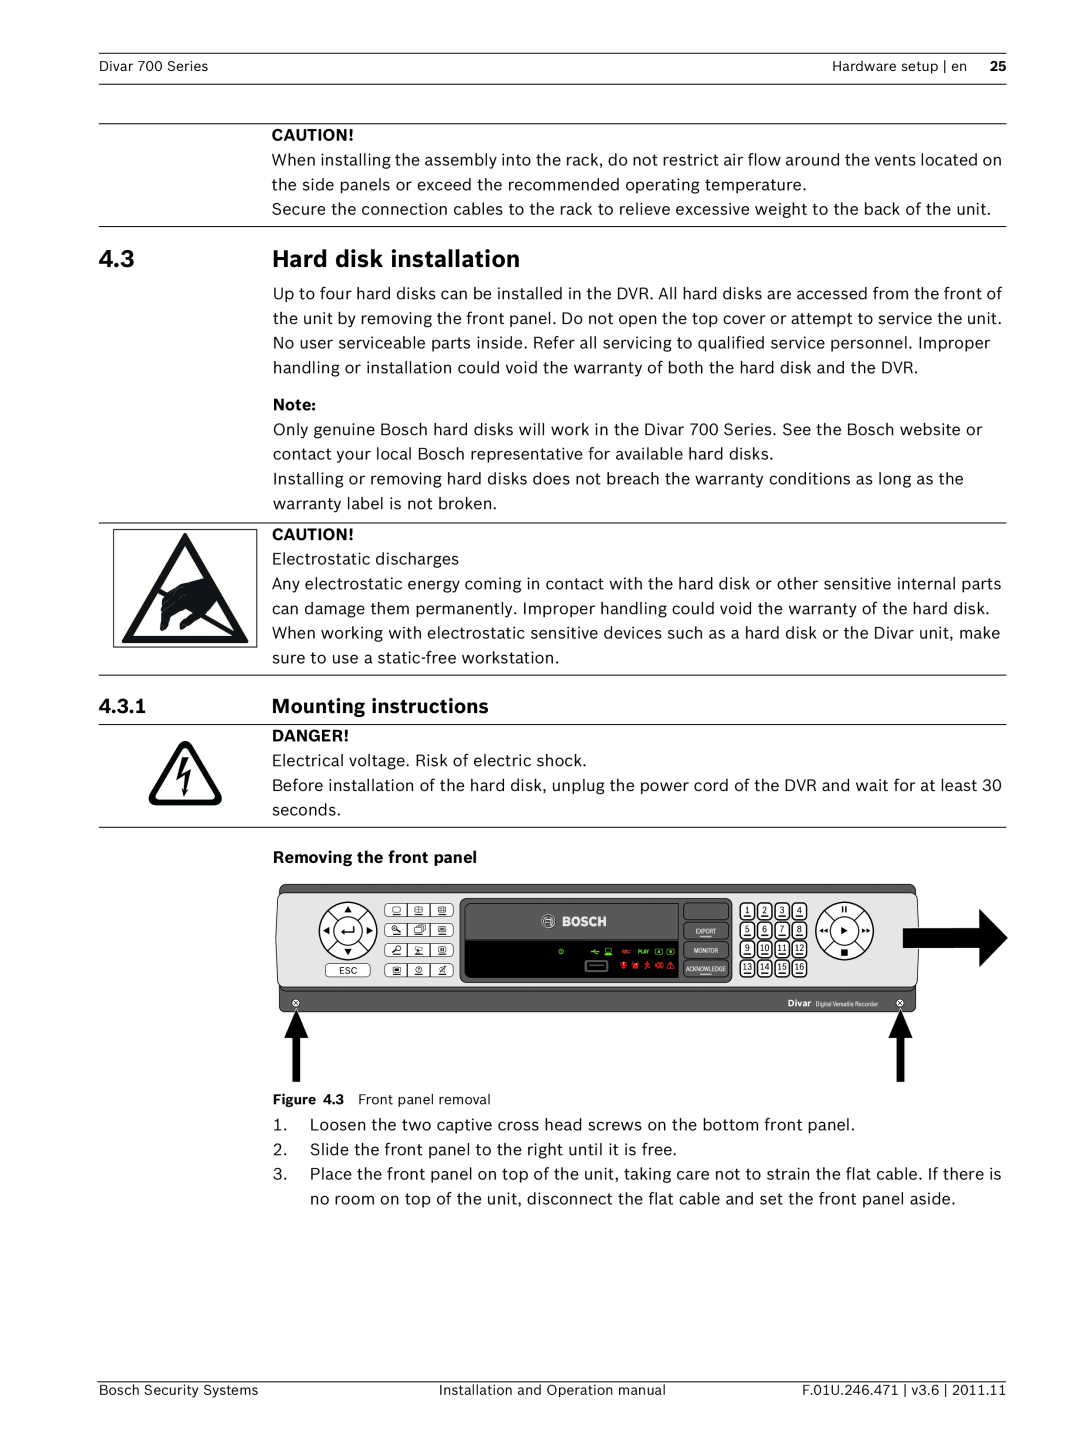 Bosch Appliances 700 Hard disk installation, 4.3.1, Mounting instructions, Removing the front panel, Danger 